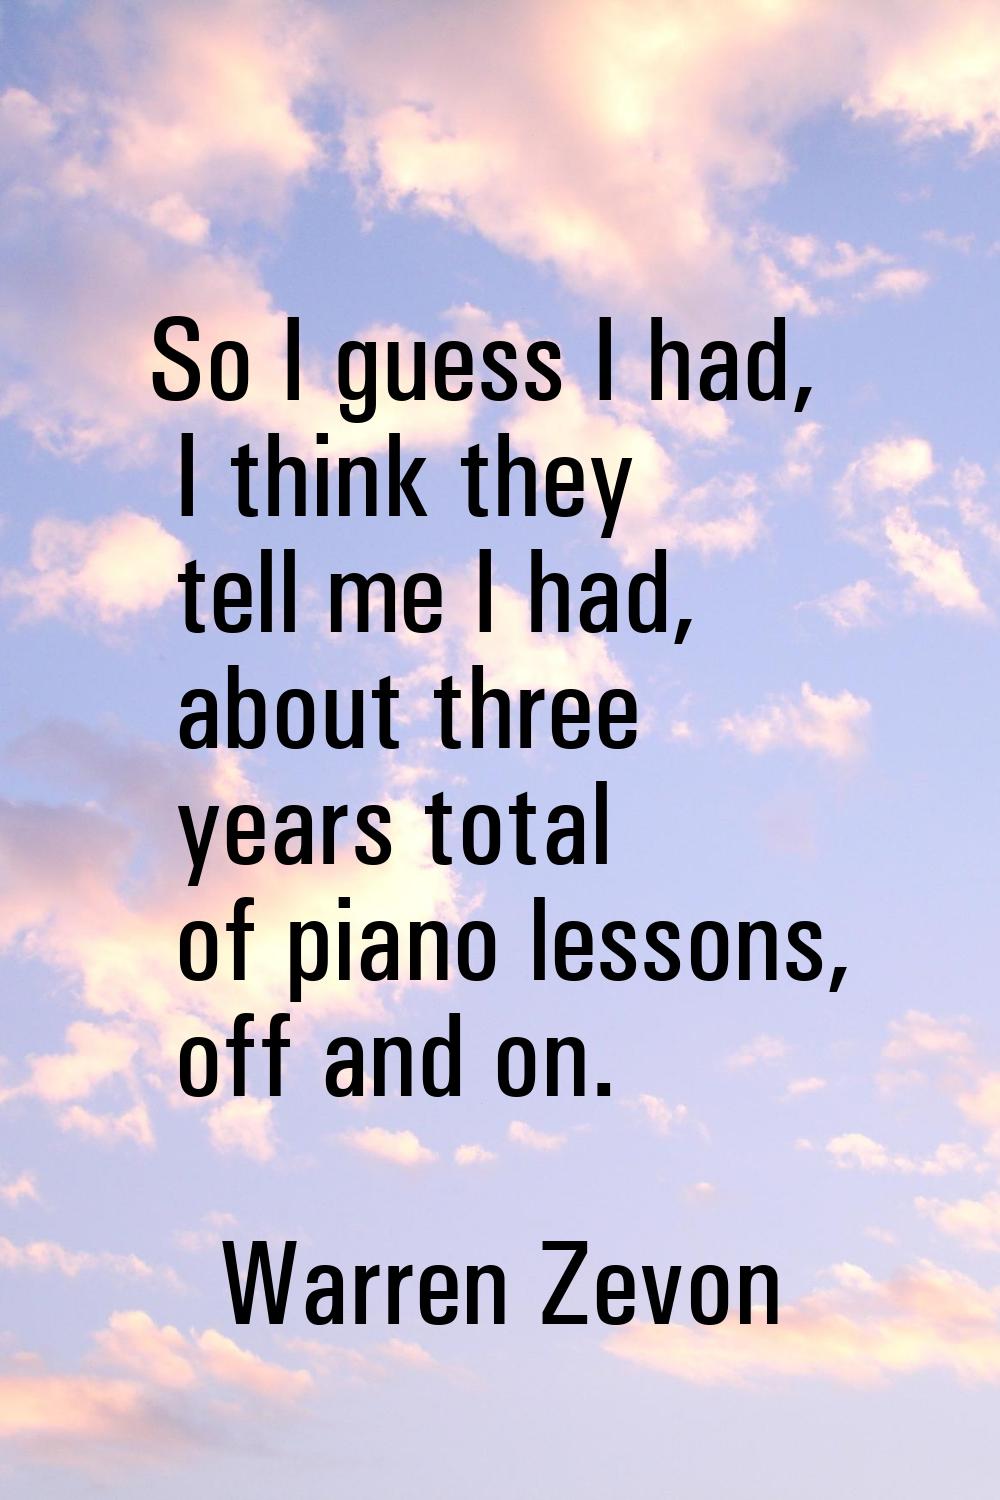 So I guess I had, I think they tell me I had, about three years total of piano lessons, off and on.